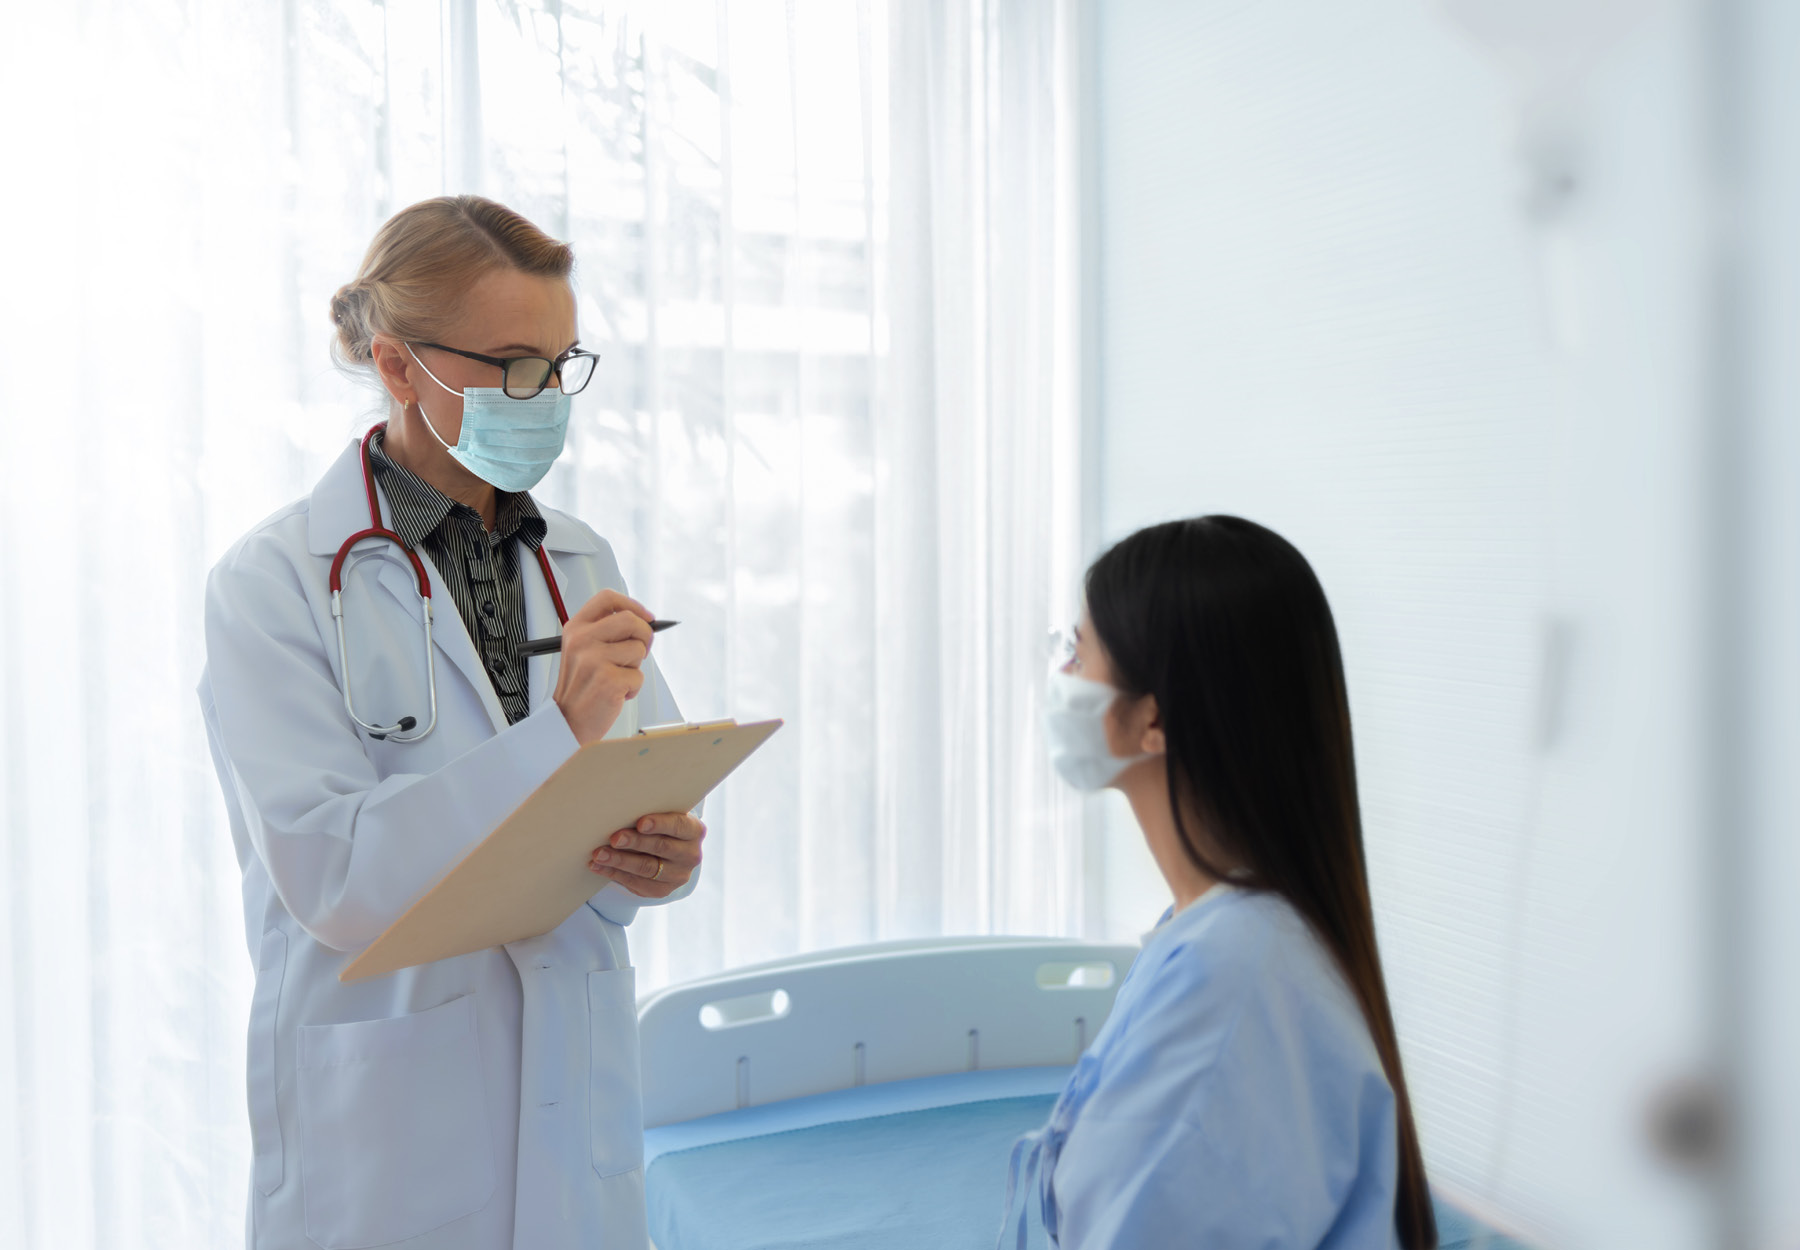 Stock image of a female patient meeting with her doctor in a hospital room